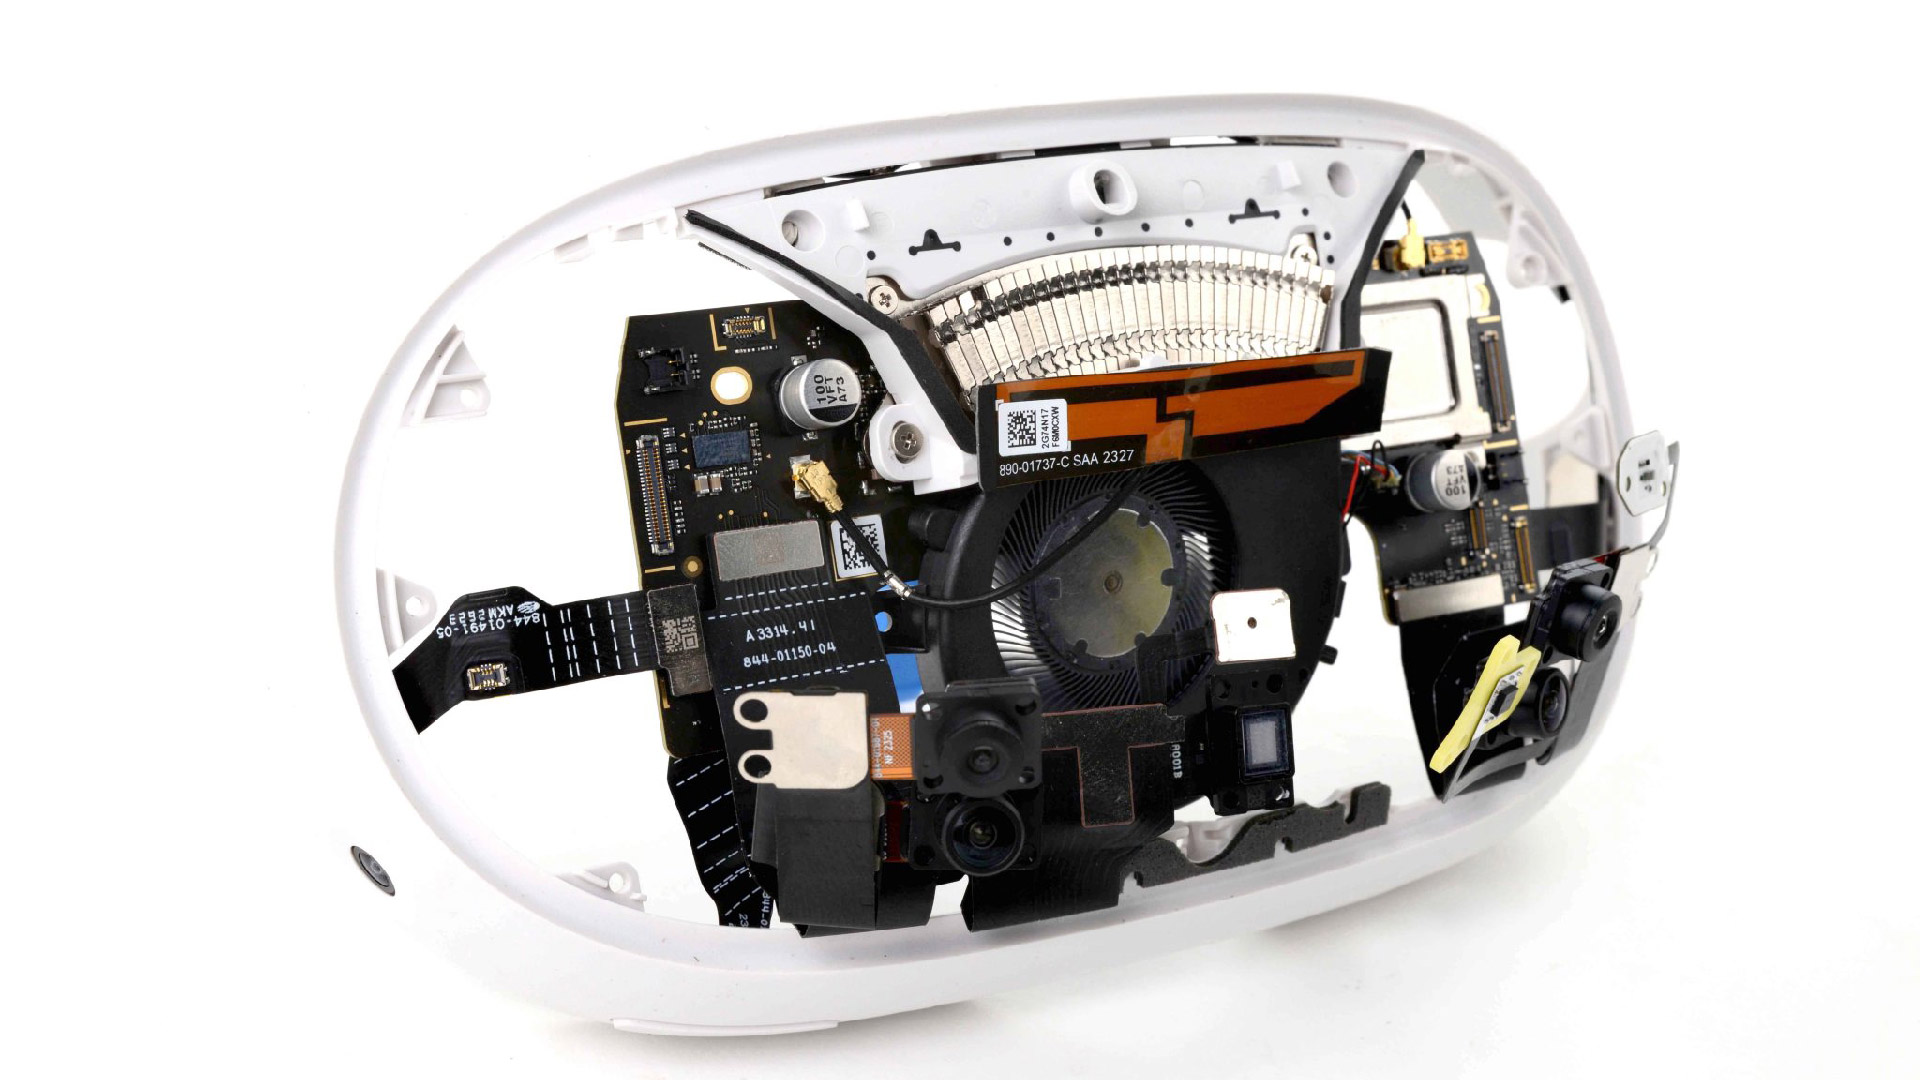 Quest 3 Teardown Shows Just How Slim the Headset Really Is